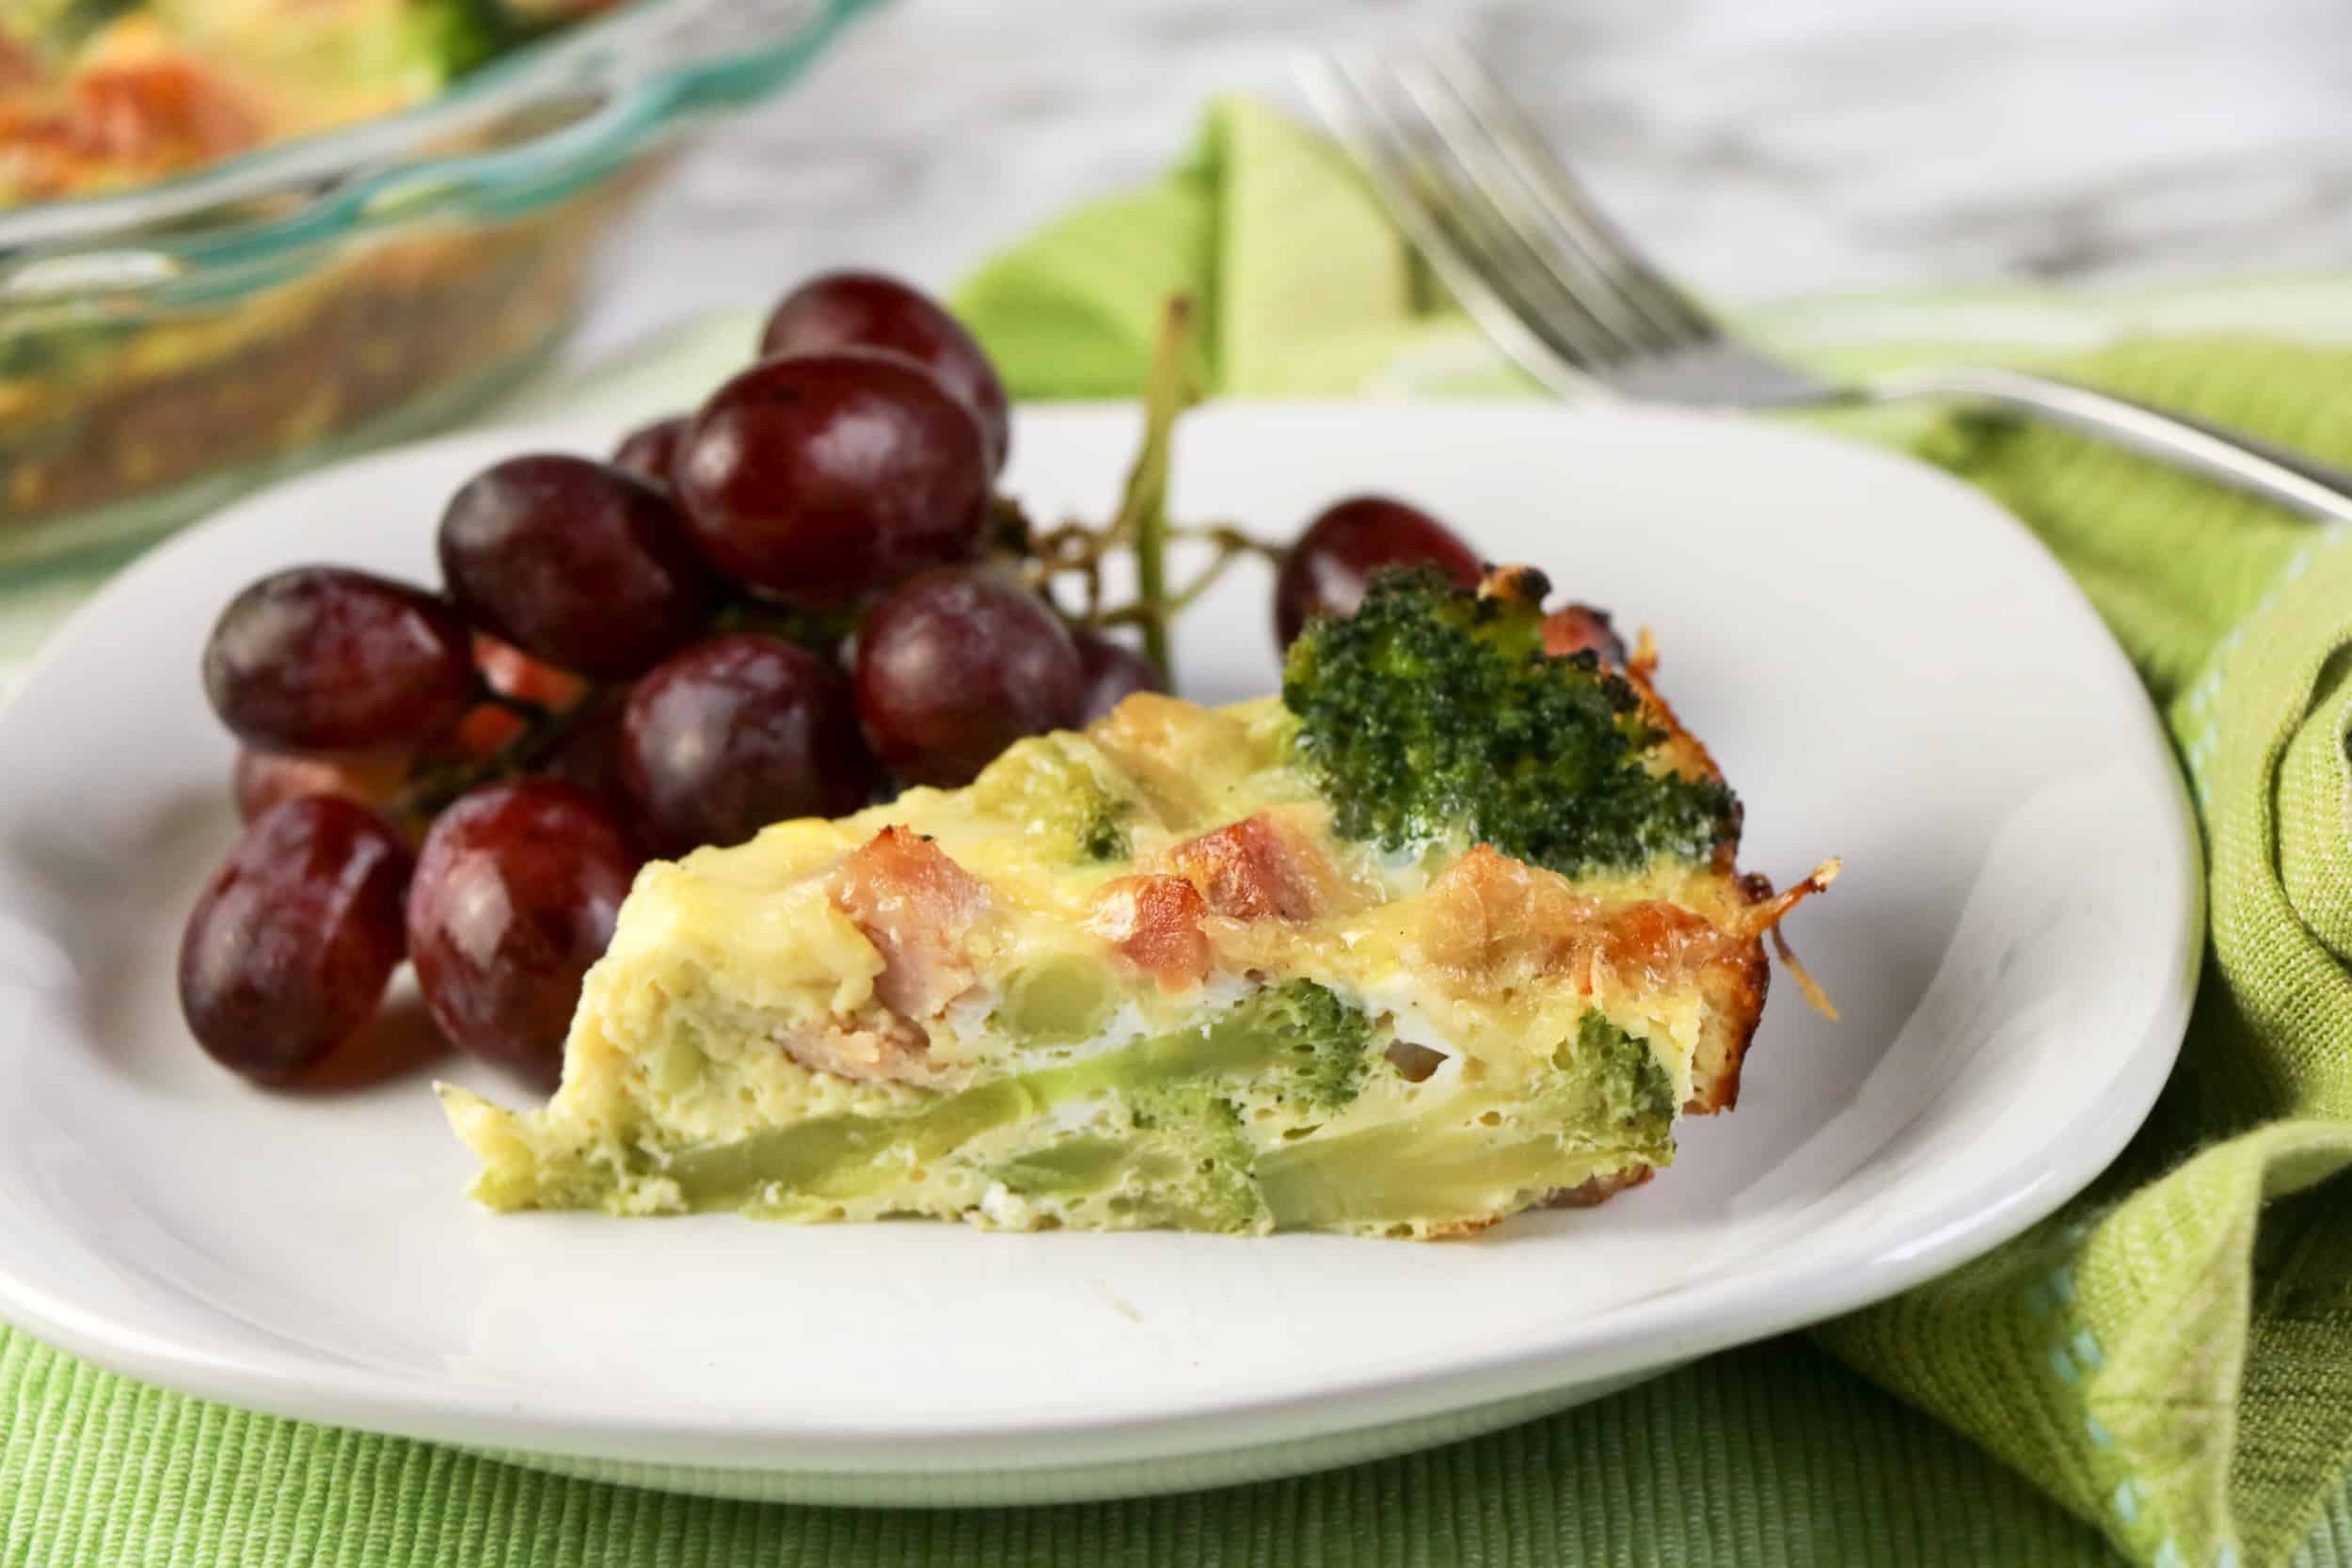 If you’re looking for a delicious gluten-free dinner recipe, you’ll love this easy ham and Gruyère cheese quiche, which is crustless.